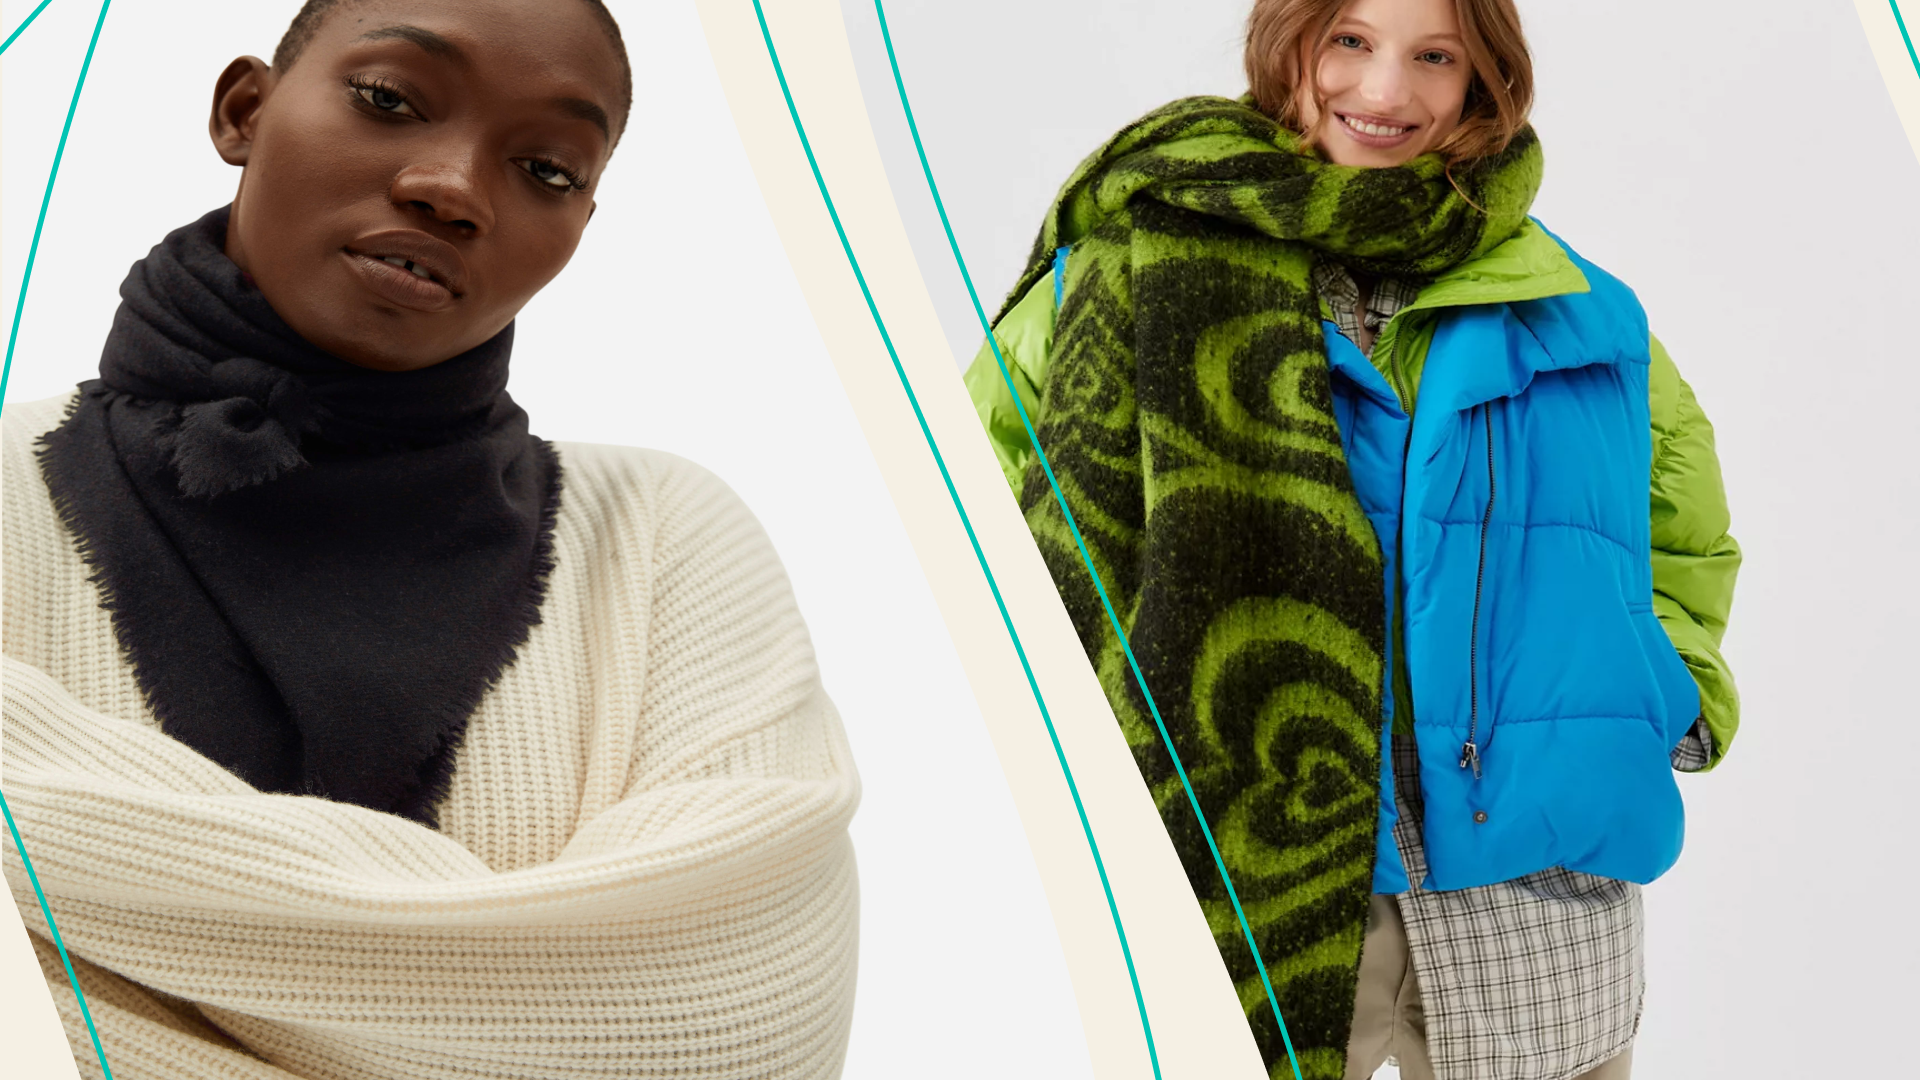 Warm Winter Scarf and Snood Options for Every Aesthetic | theSkimm